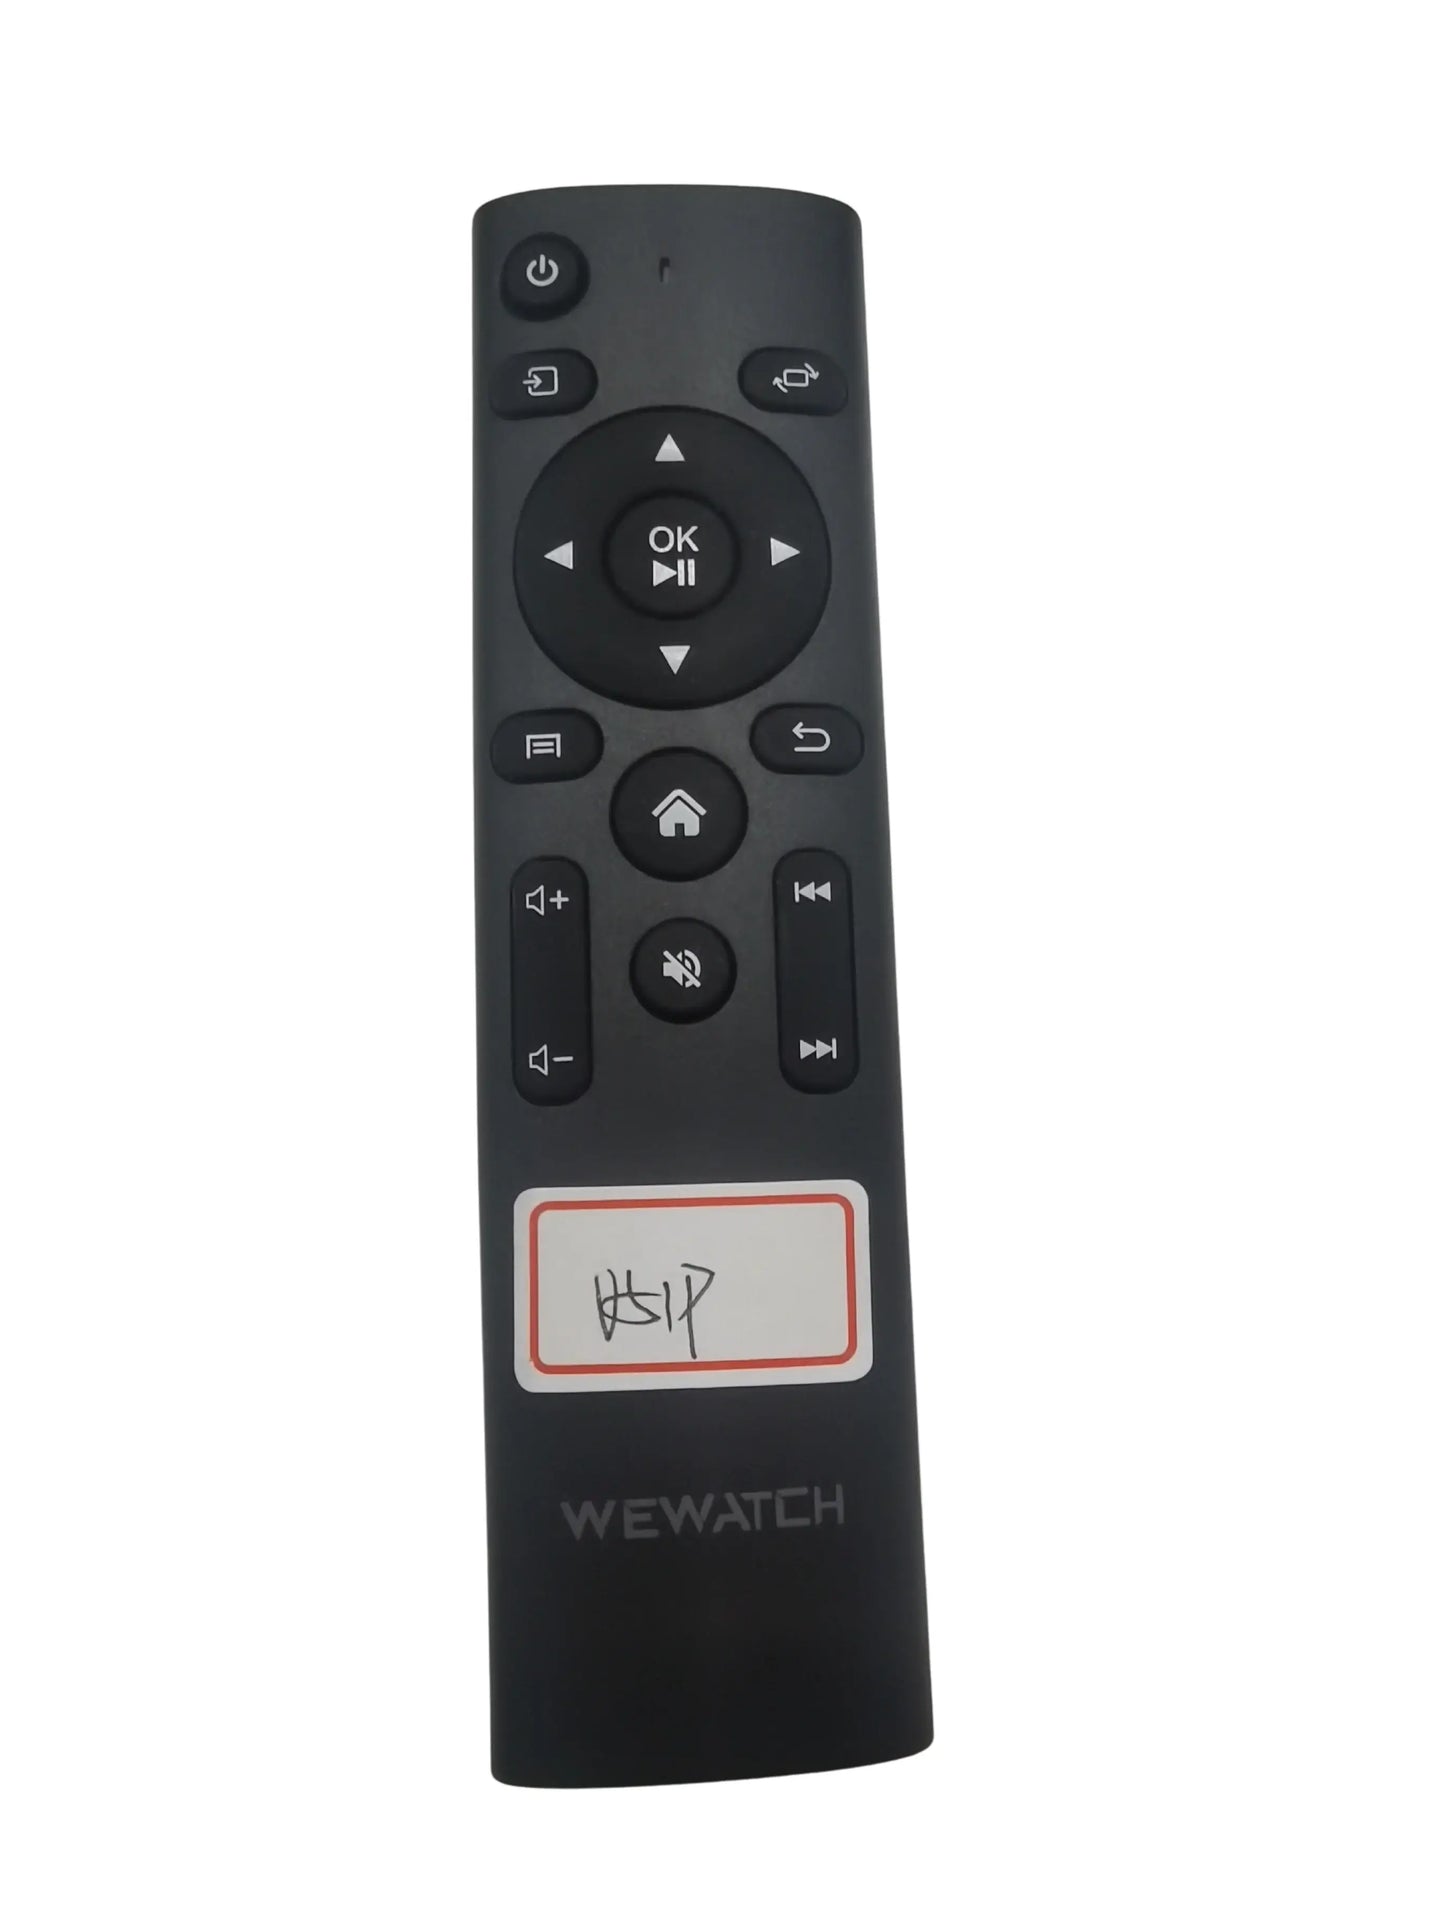 Remote Control for WEWATCH V51 V51P Projector